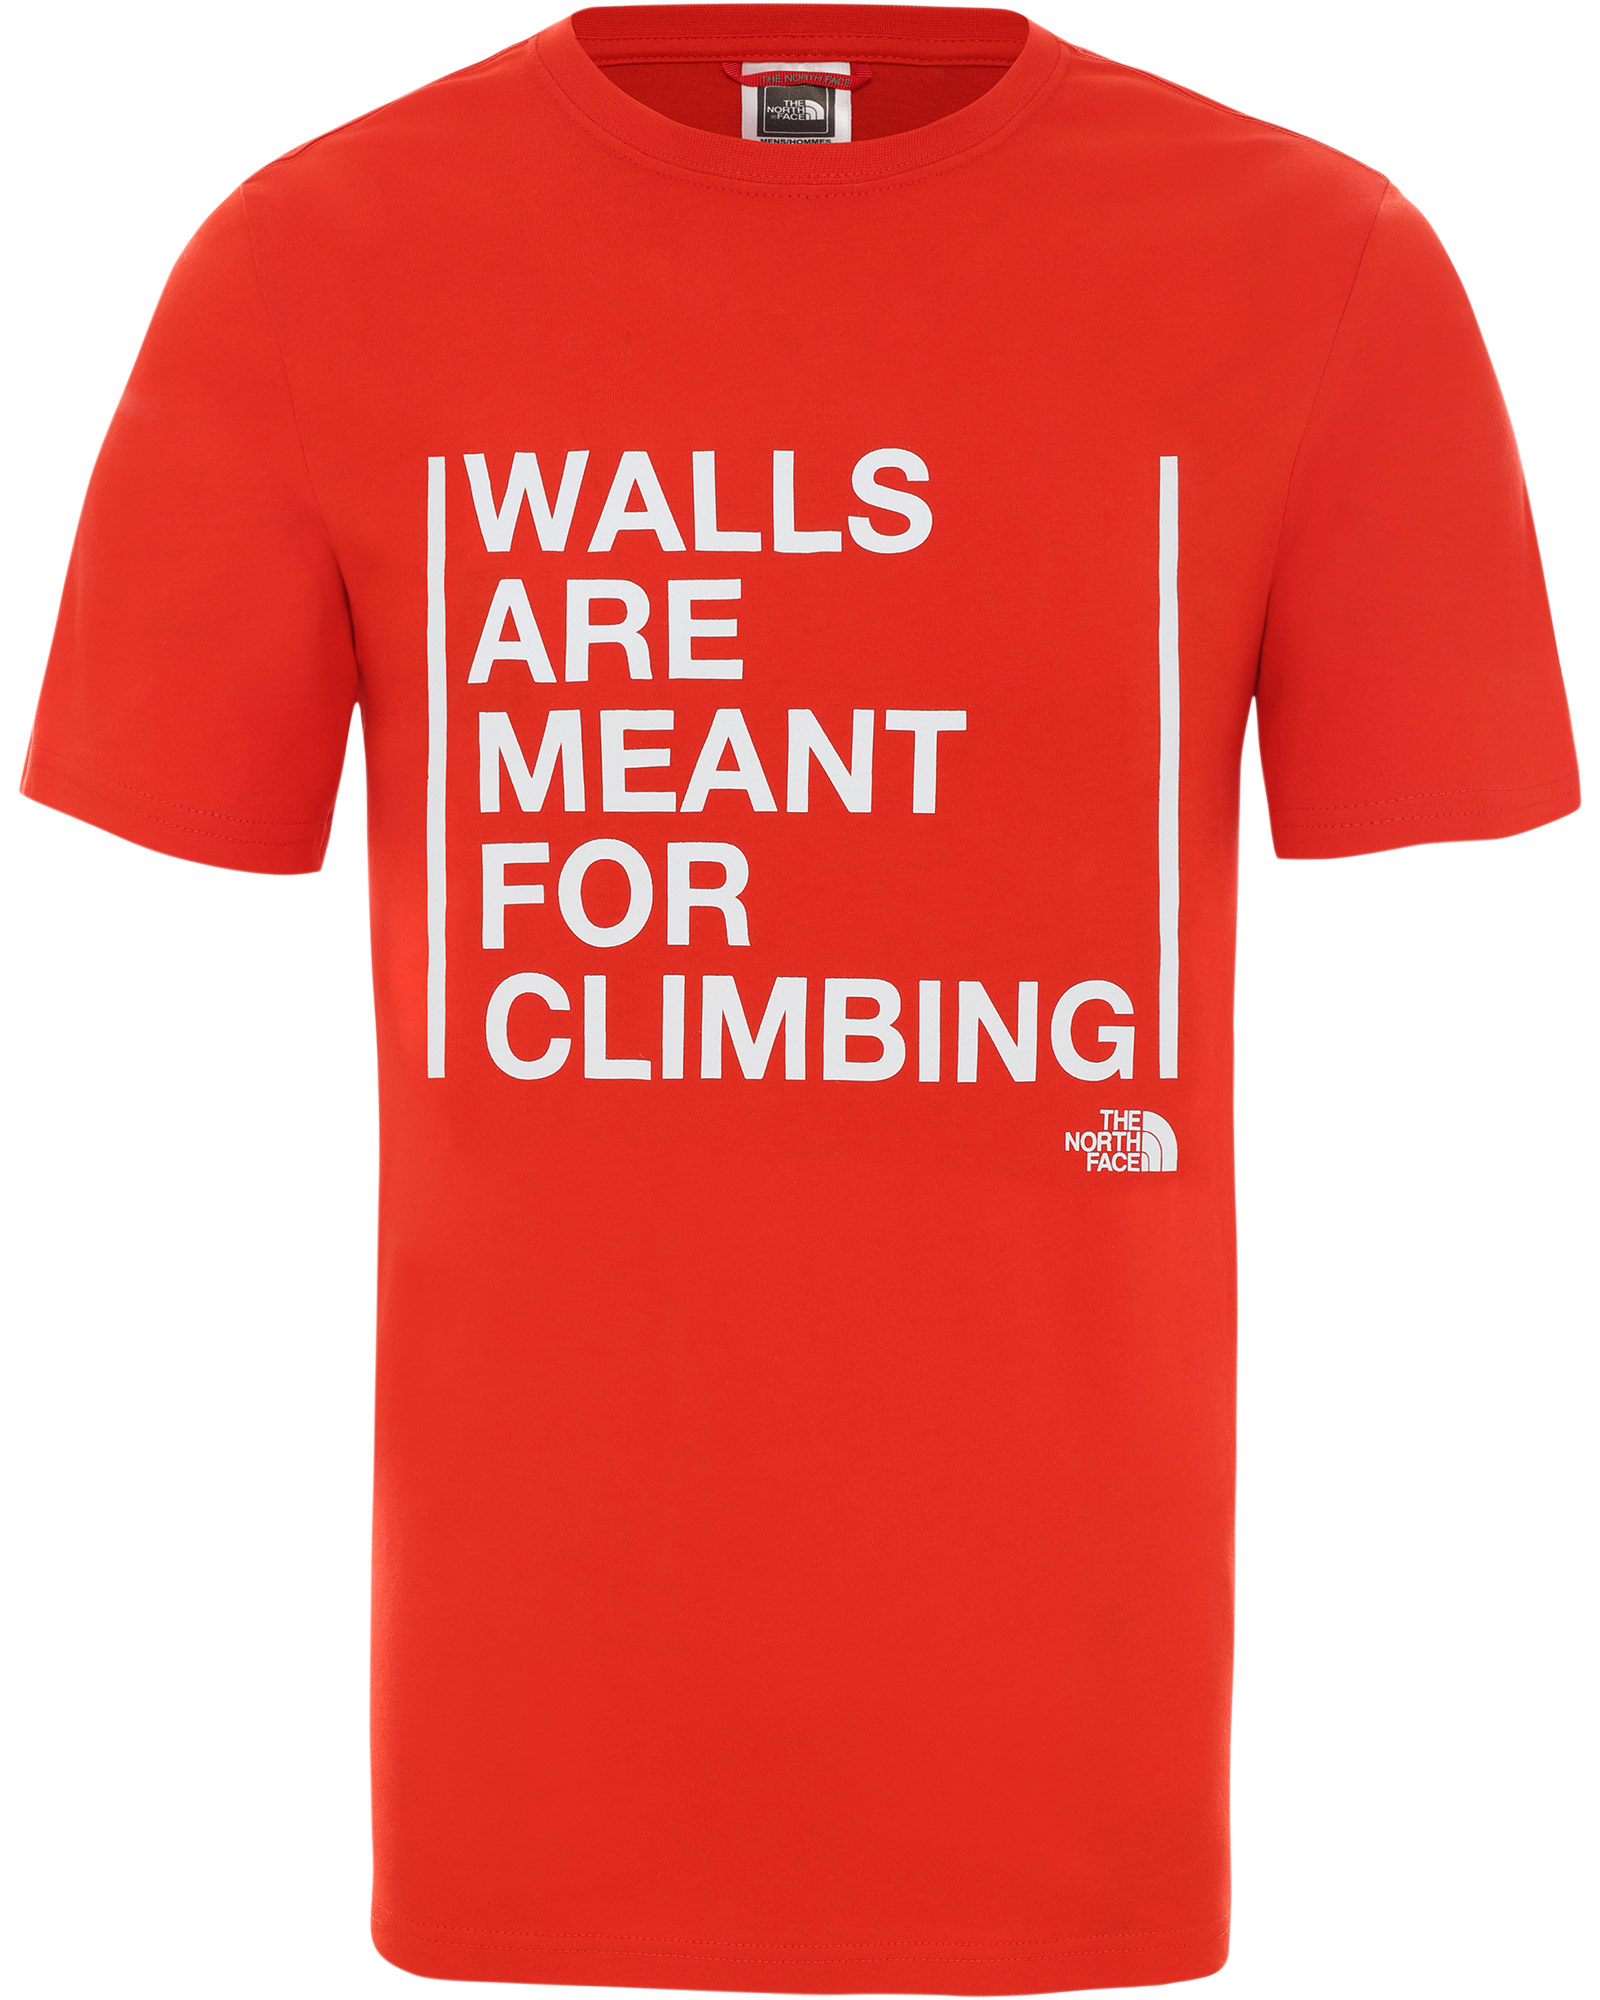 The North Face Walls Are For Climbing Men’s T Shirt - Fiery Red L